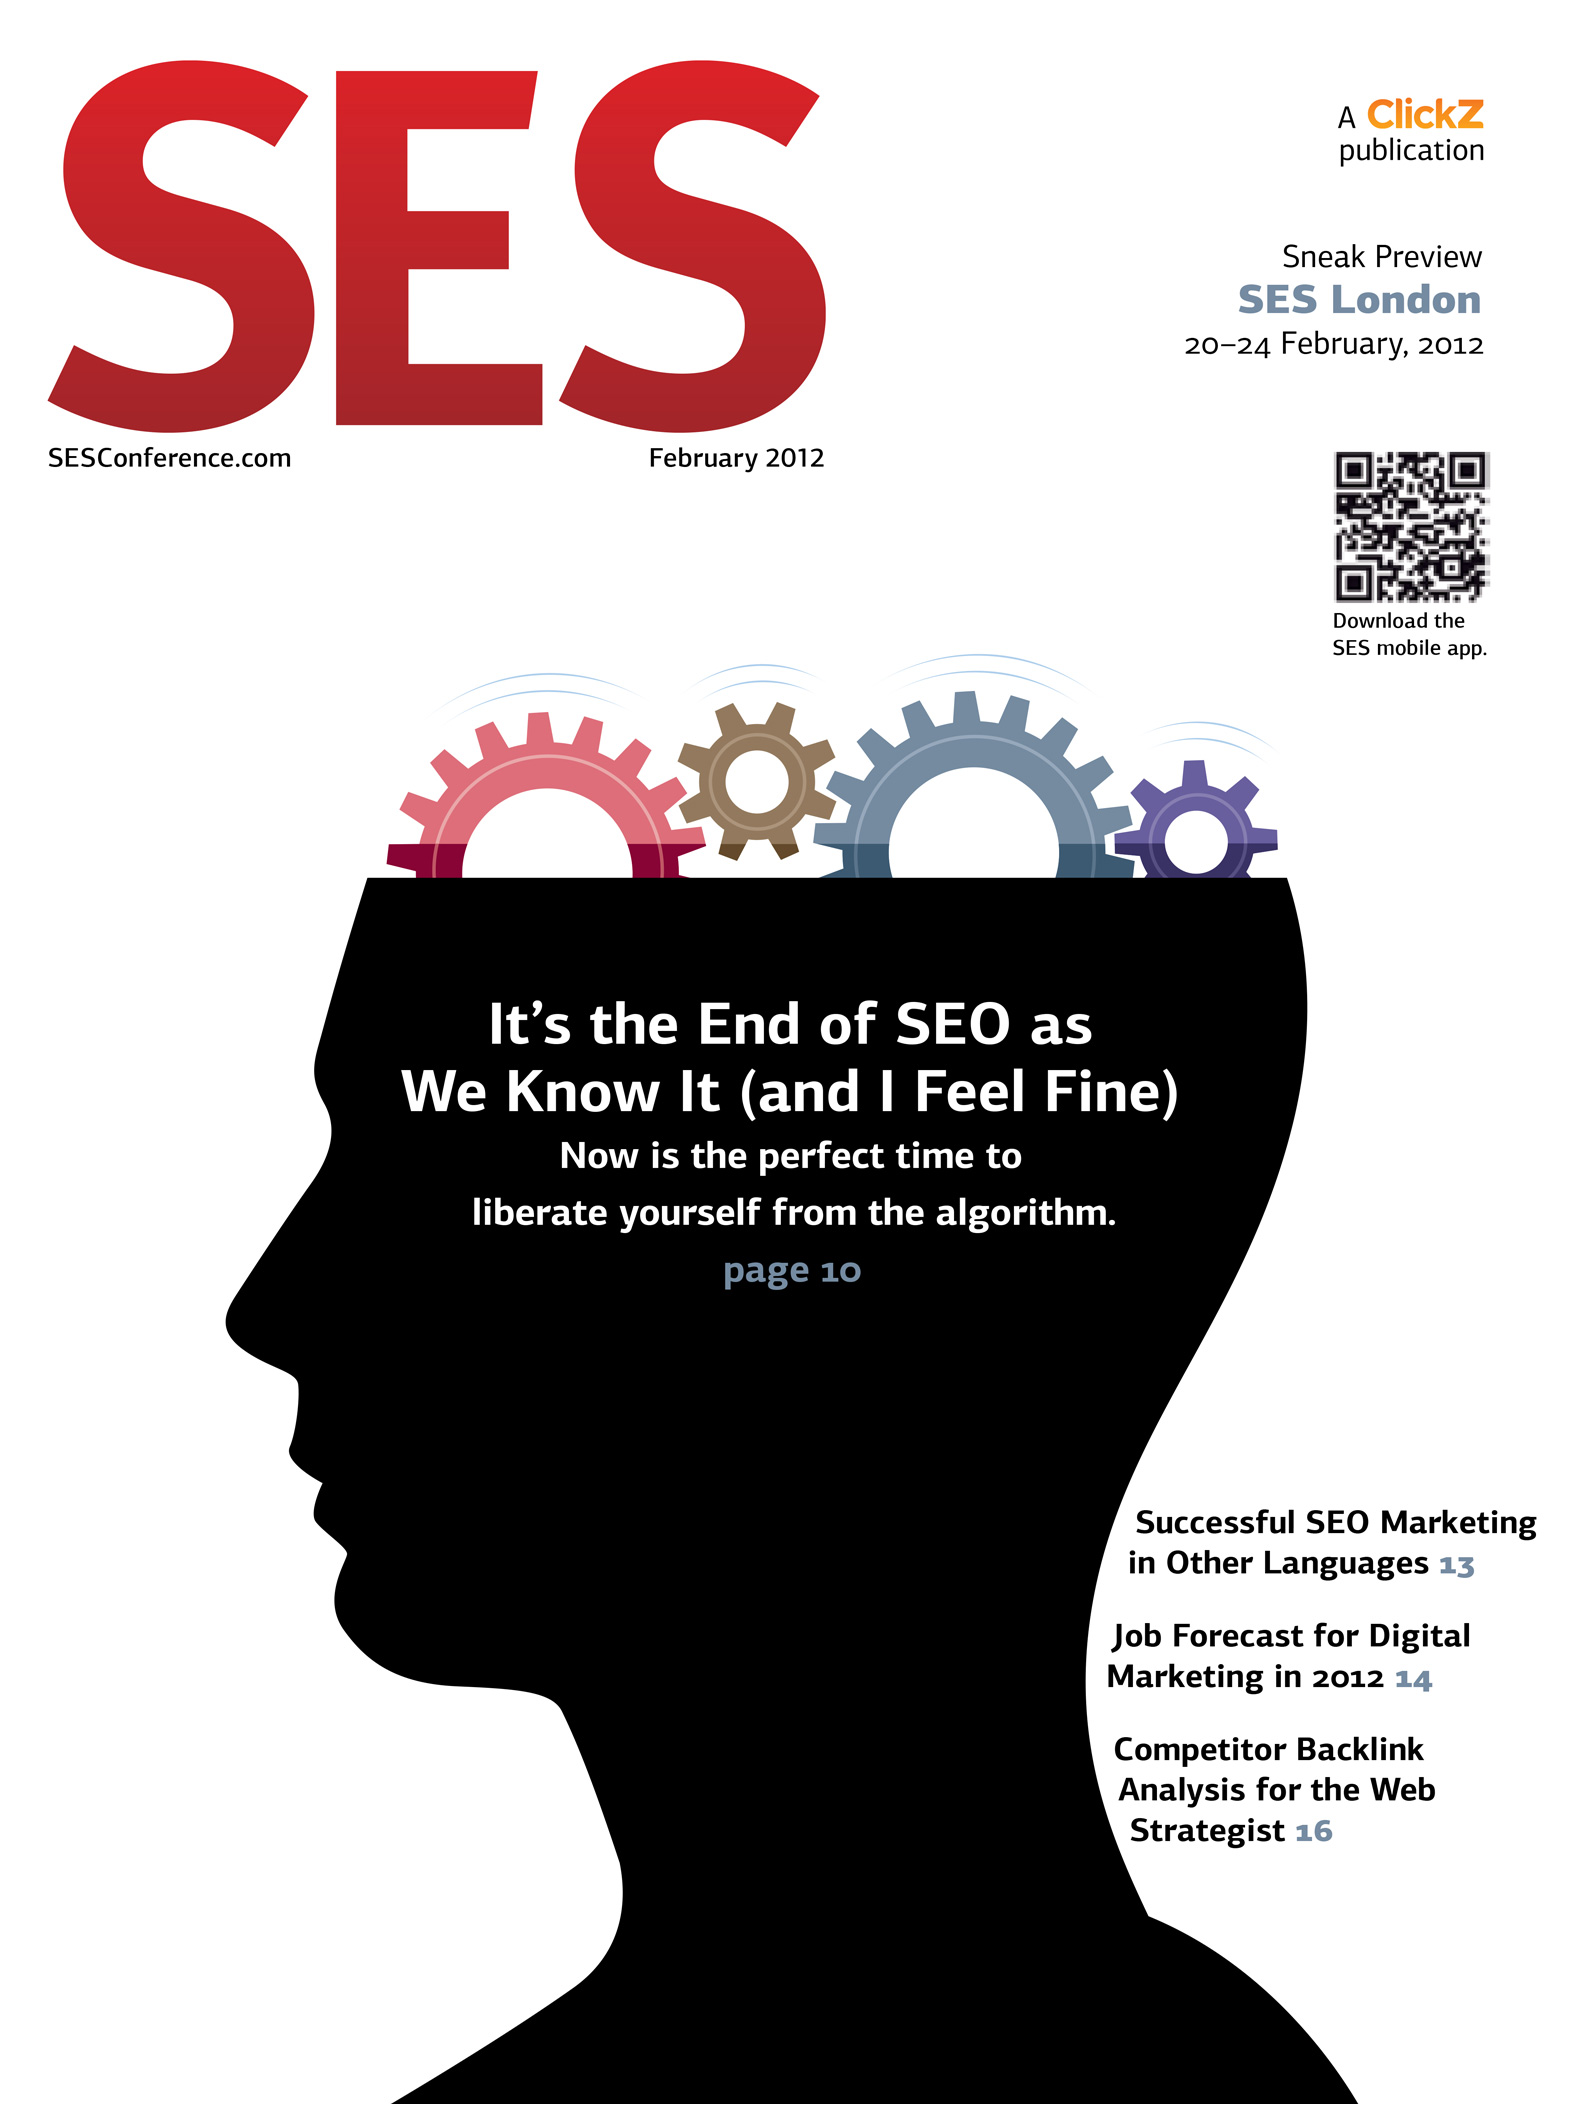 Cover of SES Magazine with an illustration of gears emerging from a human head for the story titled 'It's the End of SEO as We Know It (and I Feel Fine).'